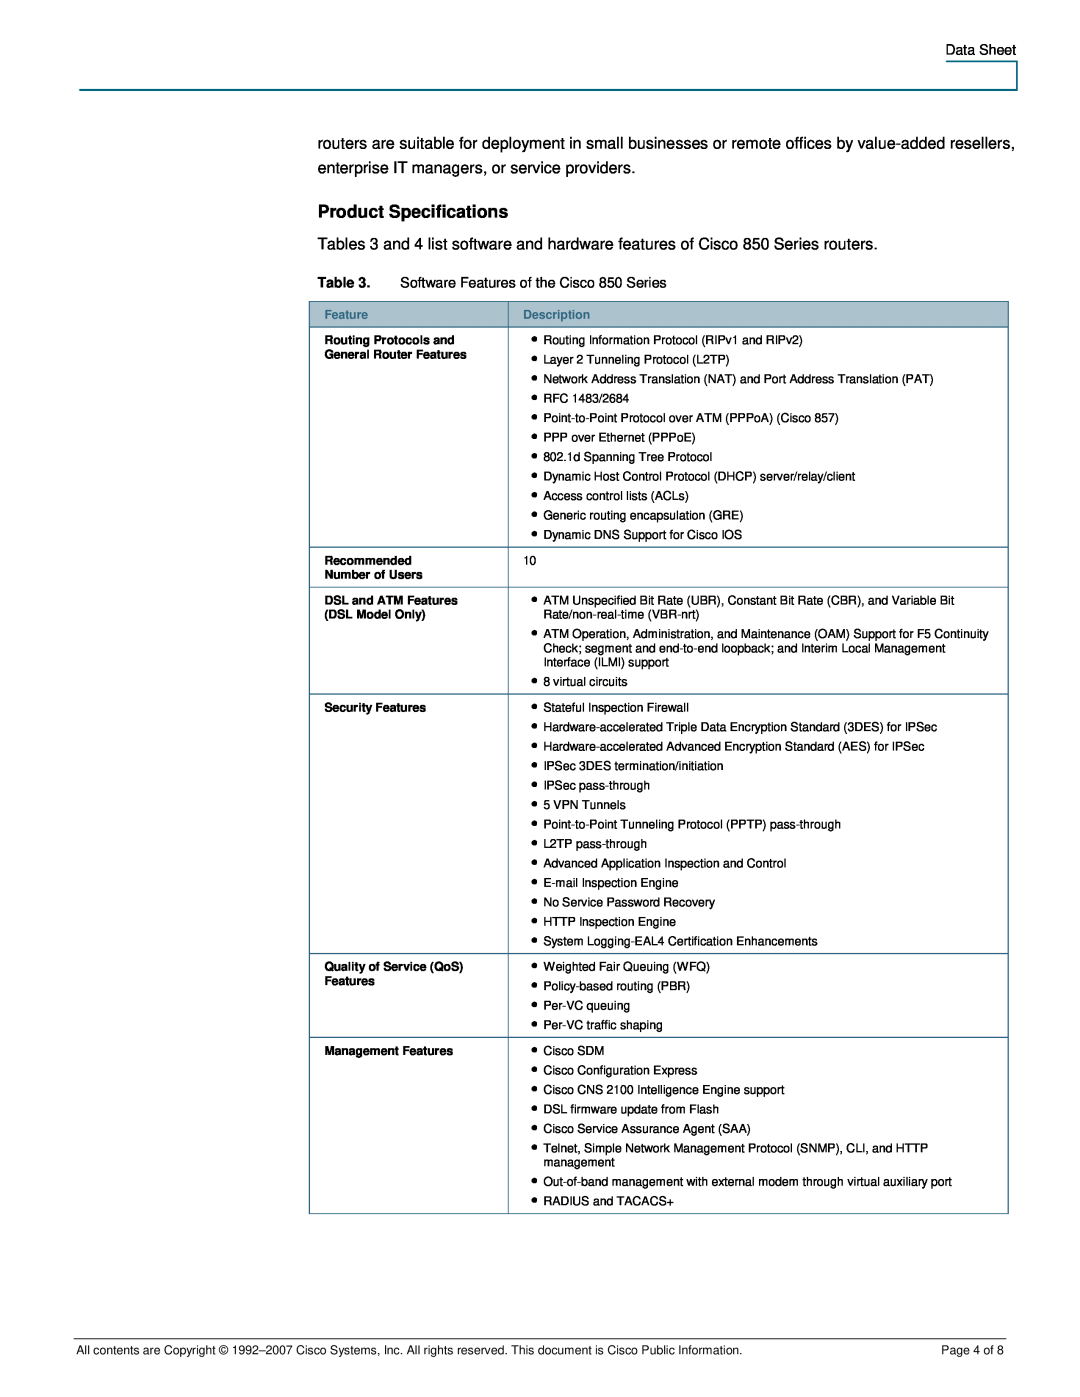 Cisco Systems CISCO851WGEK9RF manual Product Specifications, Page 4 of 